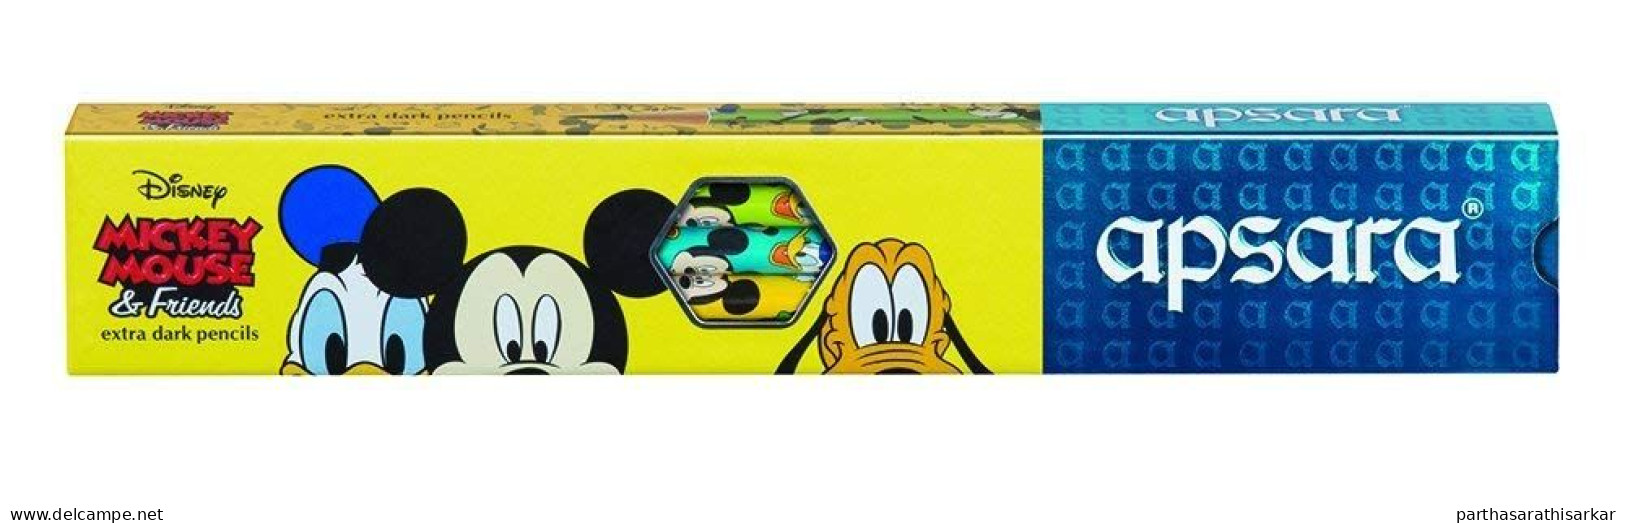 MICKY MOUSE DISNEY PENCILS FROM INDIAN BRAND APSARA SET OF 5 PENCILS (2 SETS IN A PACK) - Stempels